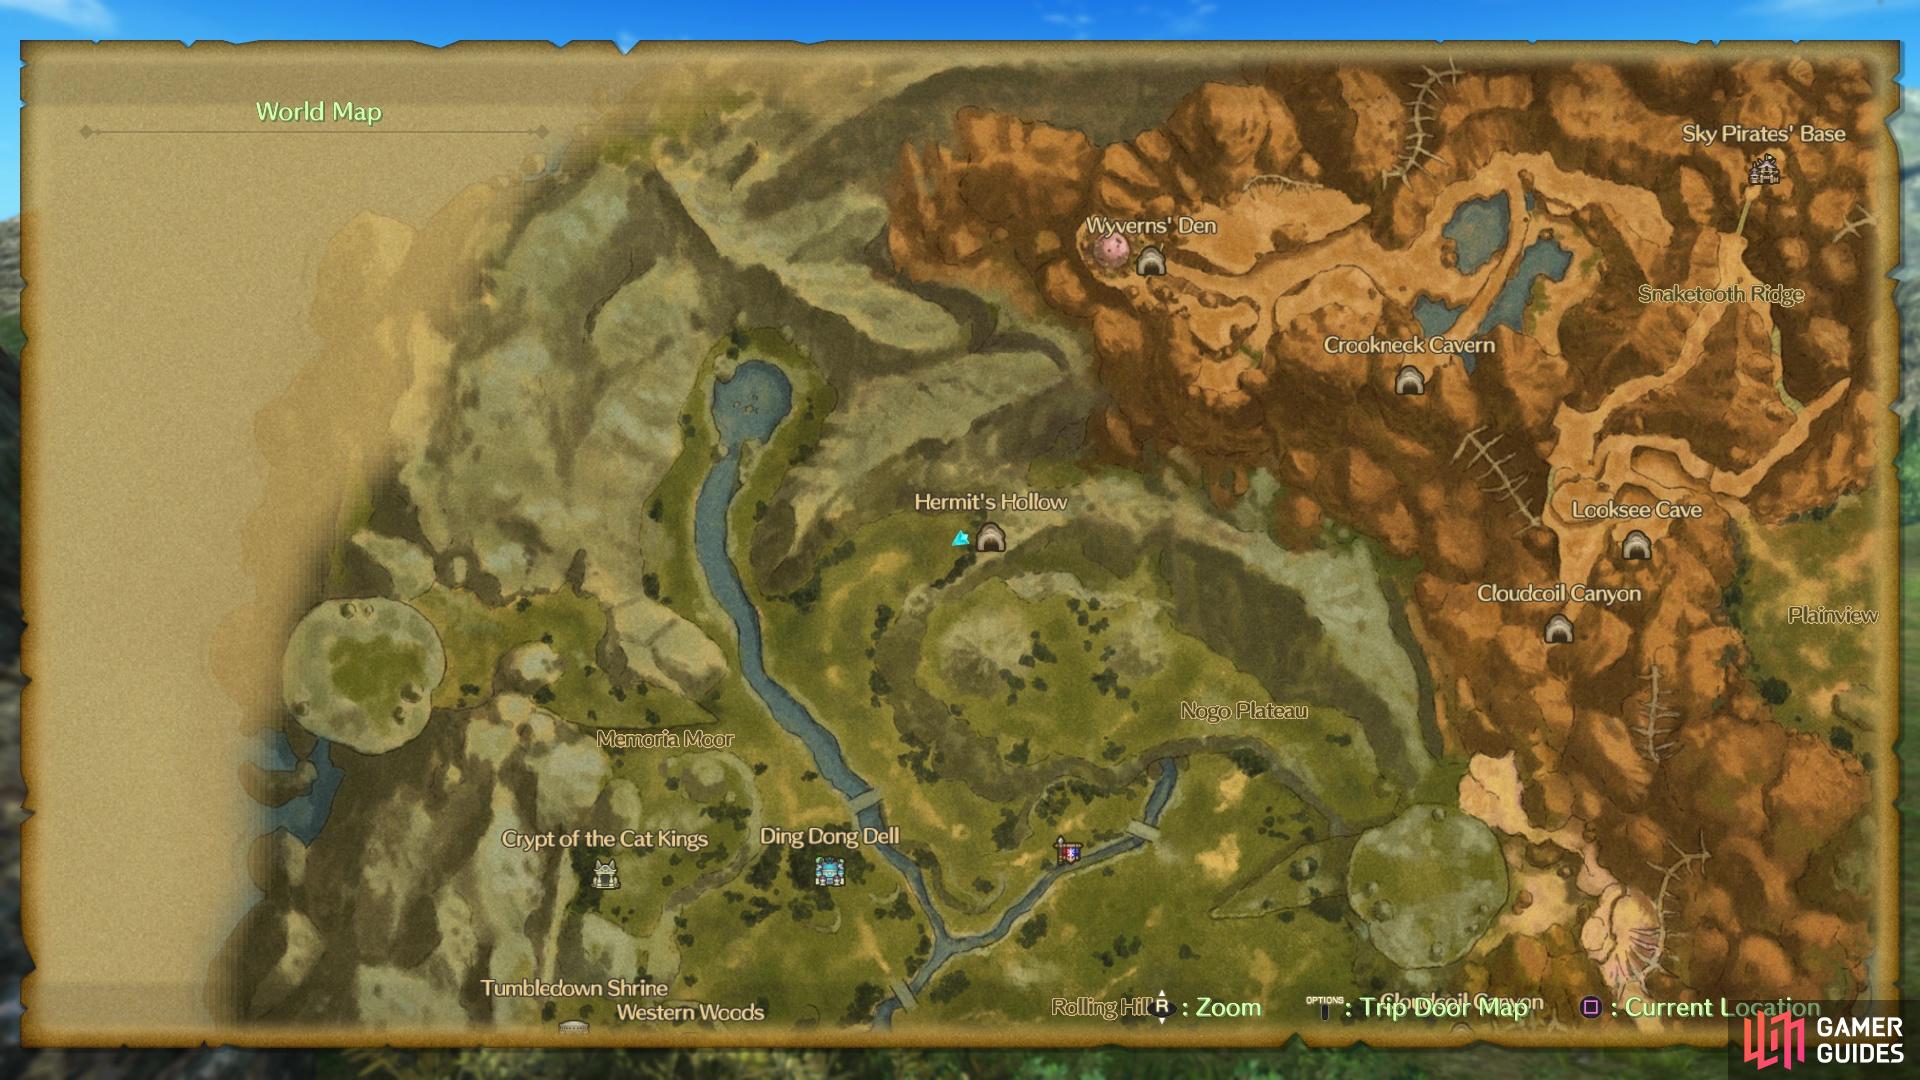 Hermit's Hollow on the world map